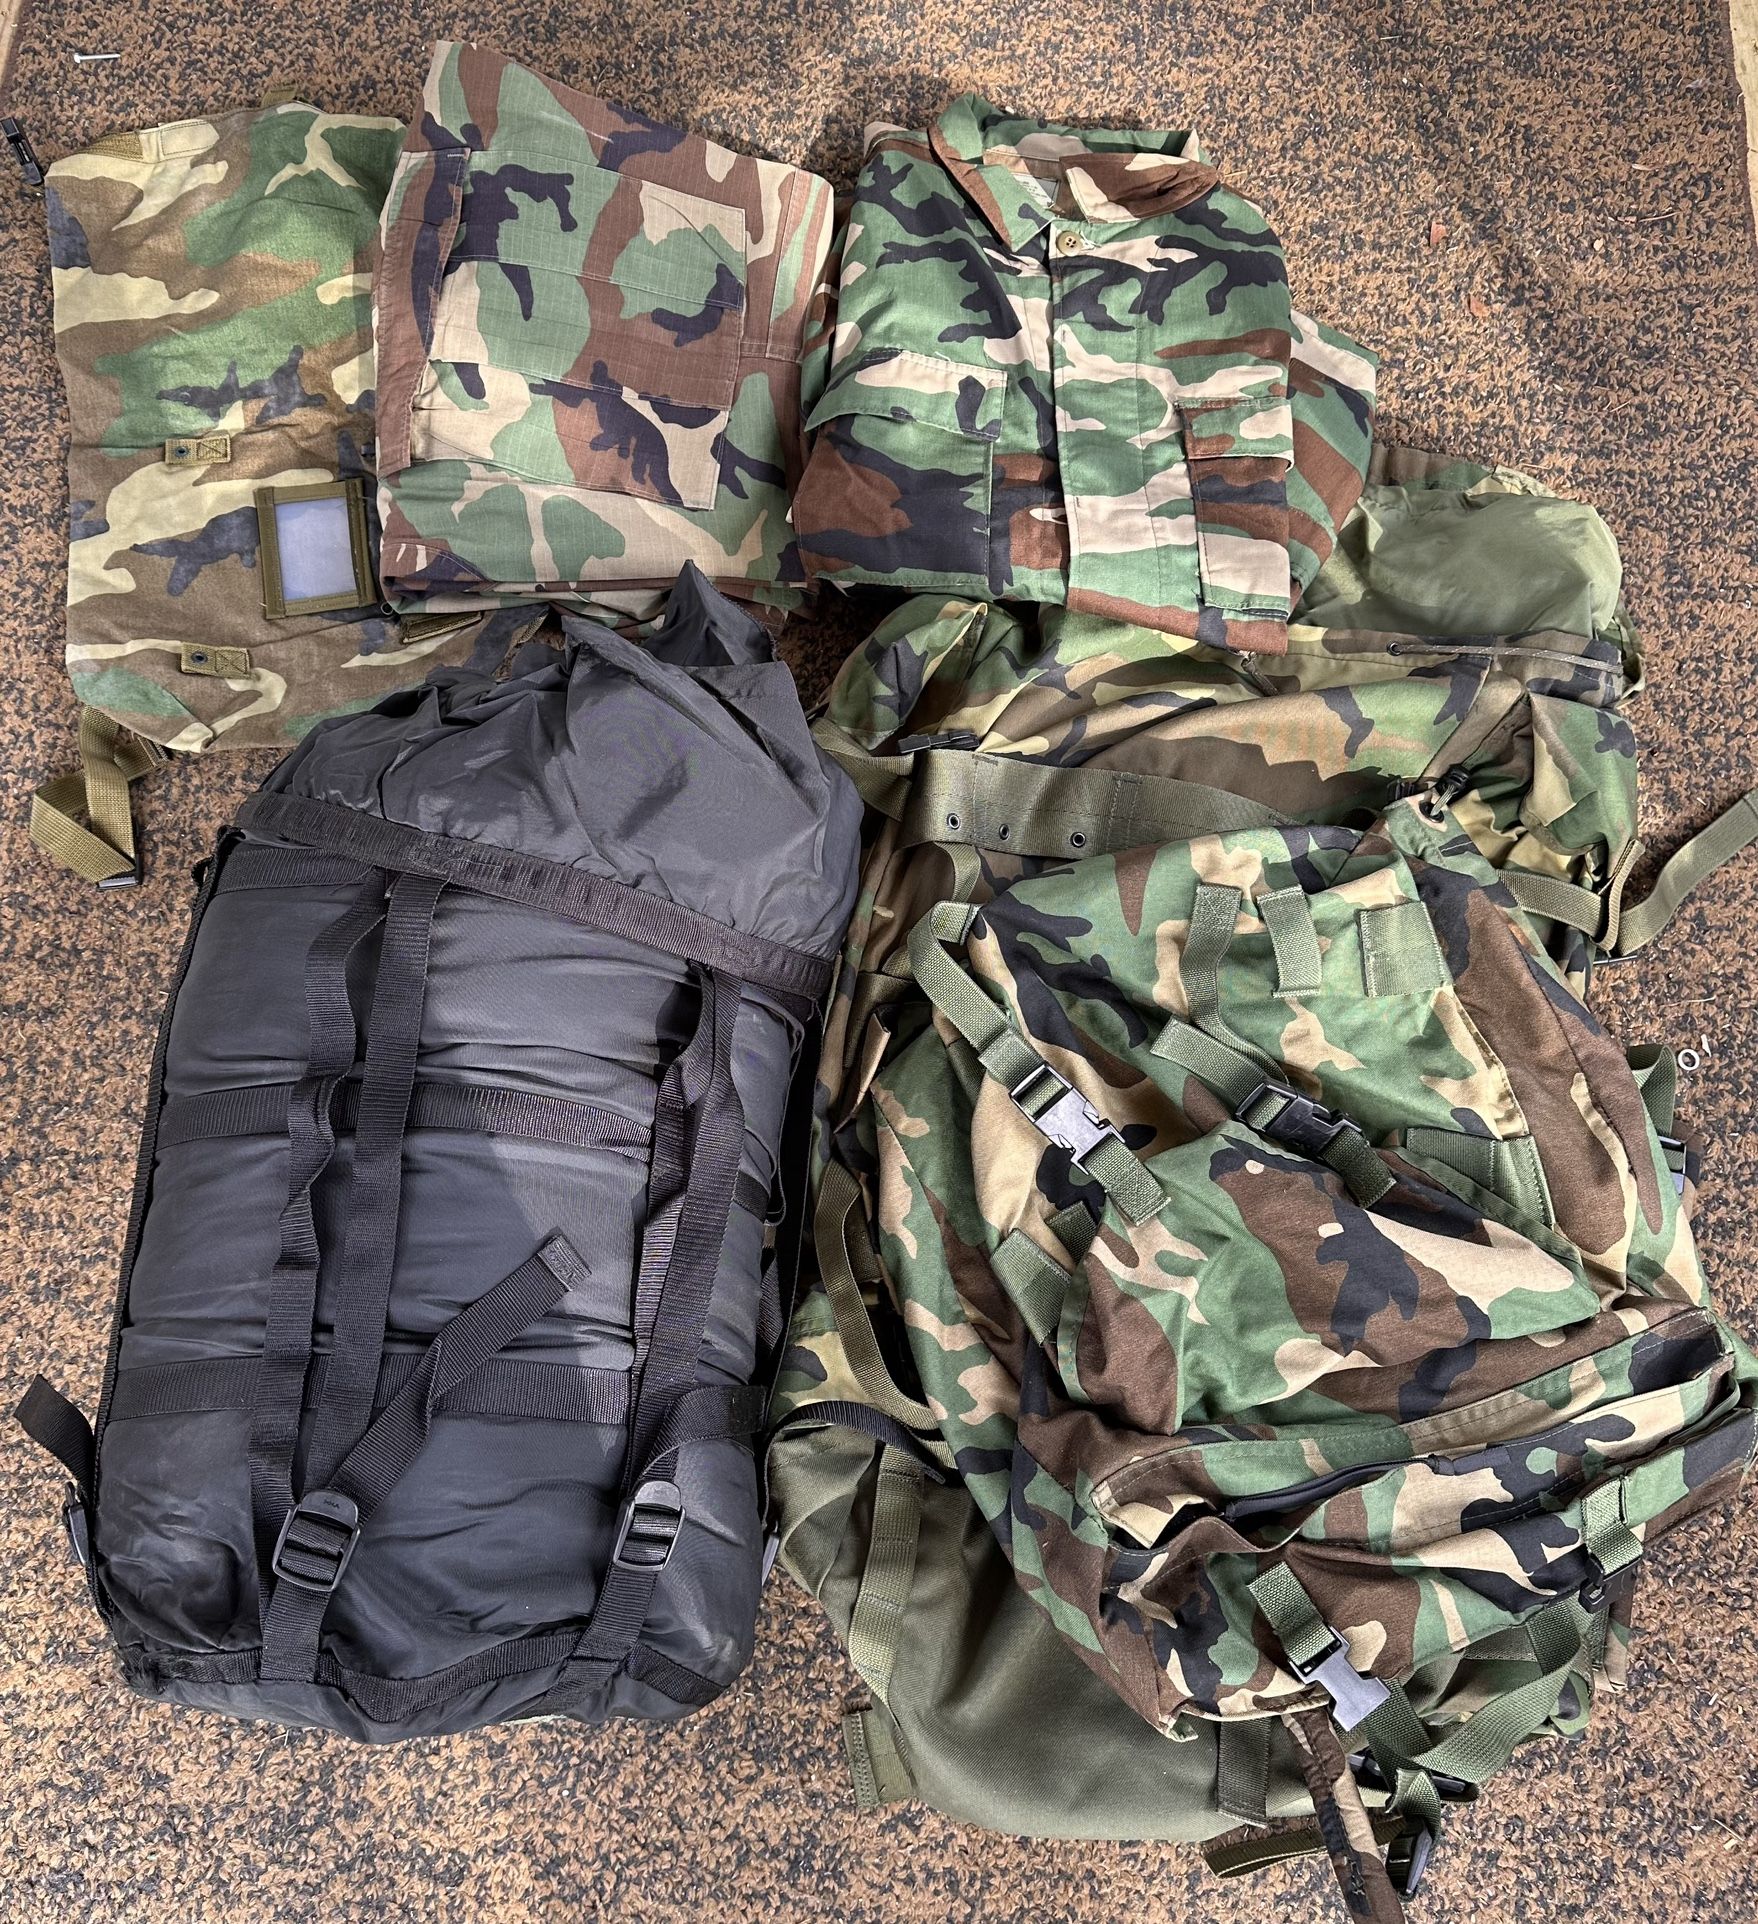 CFP 90 Ranger Rucksack With Patrol Pack And Three Piece Sleep System 